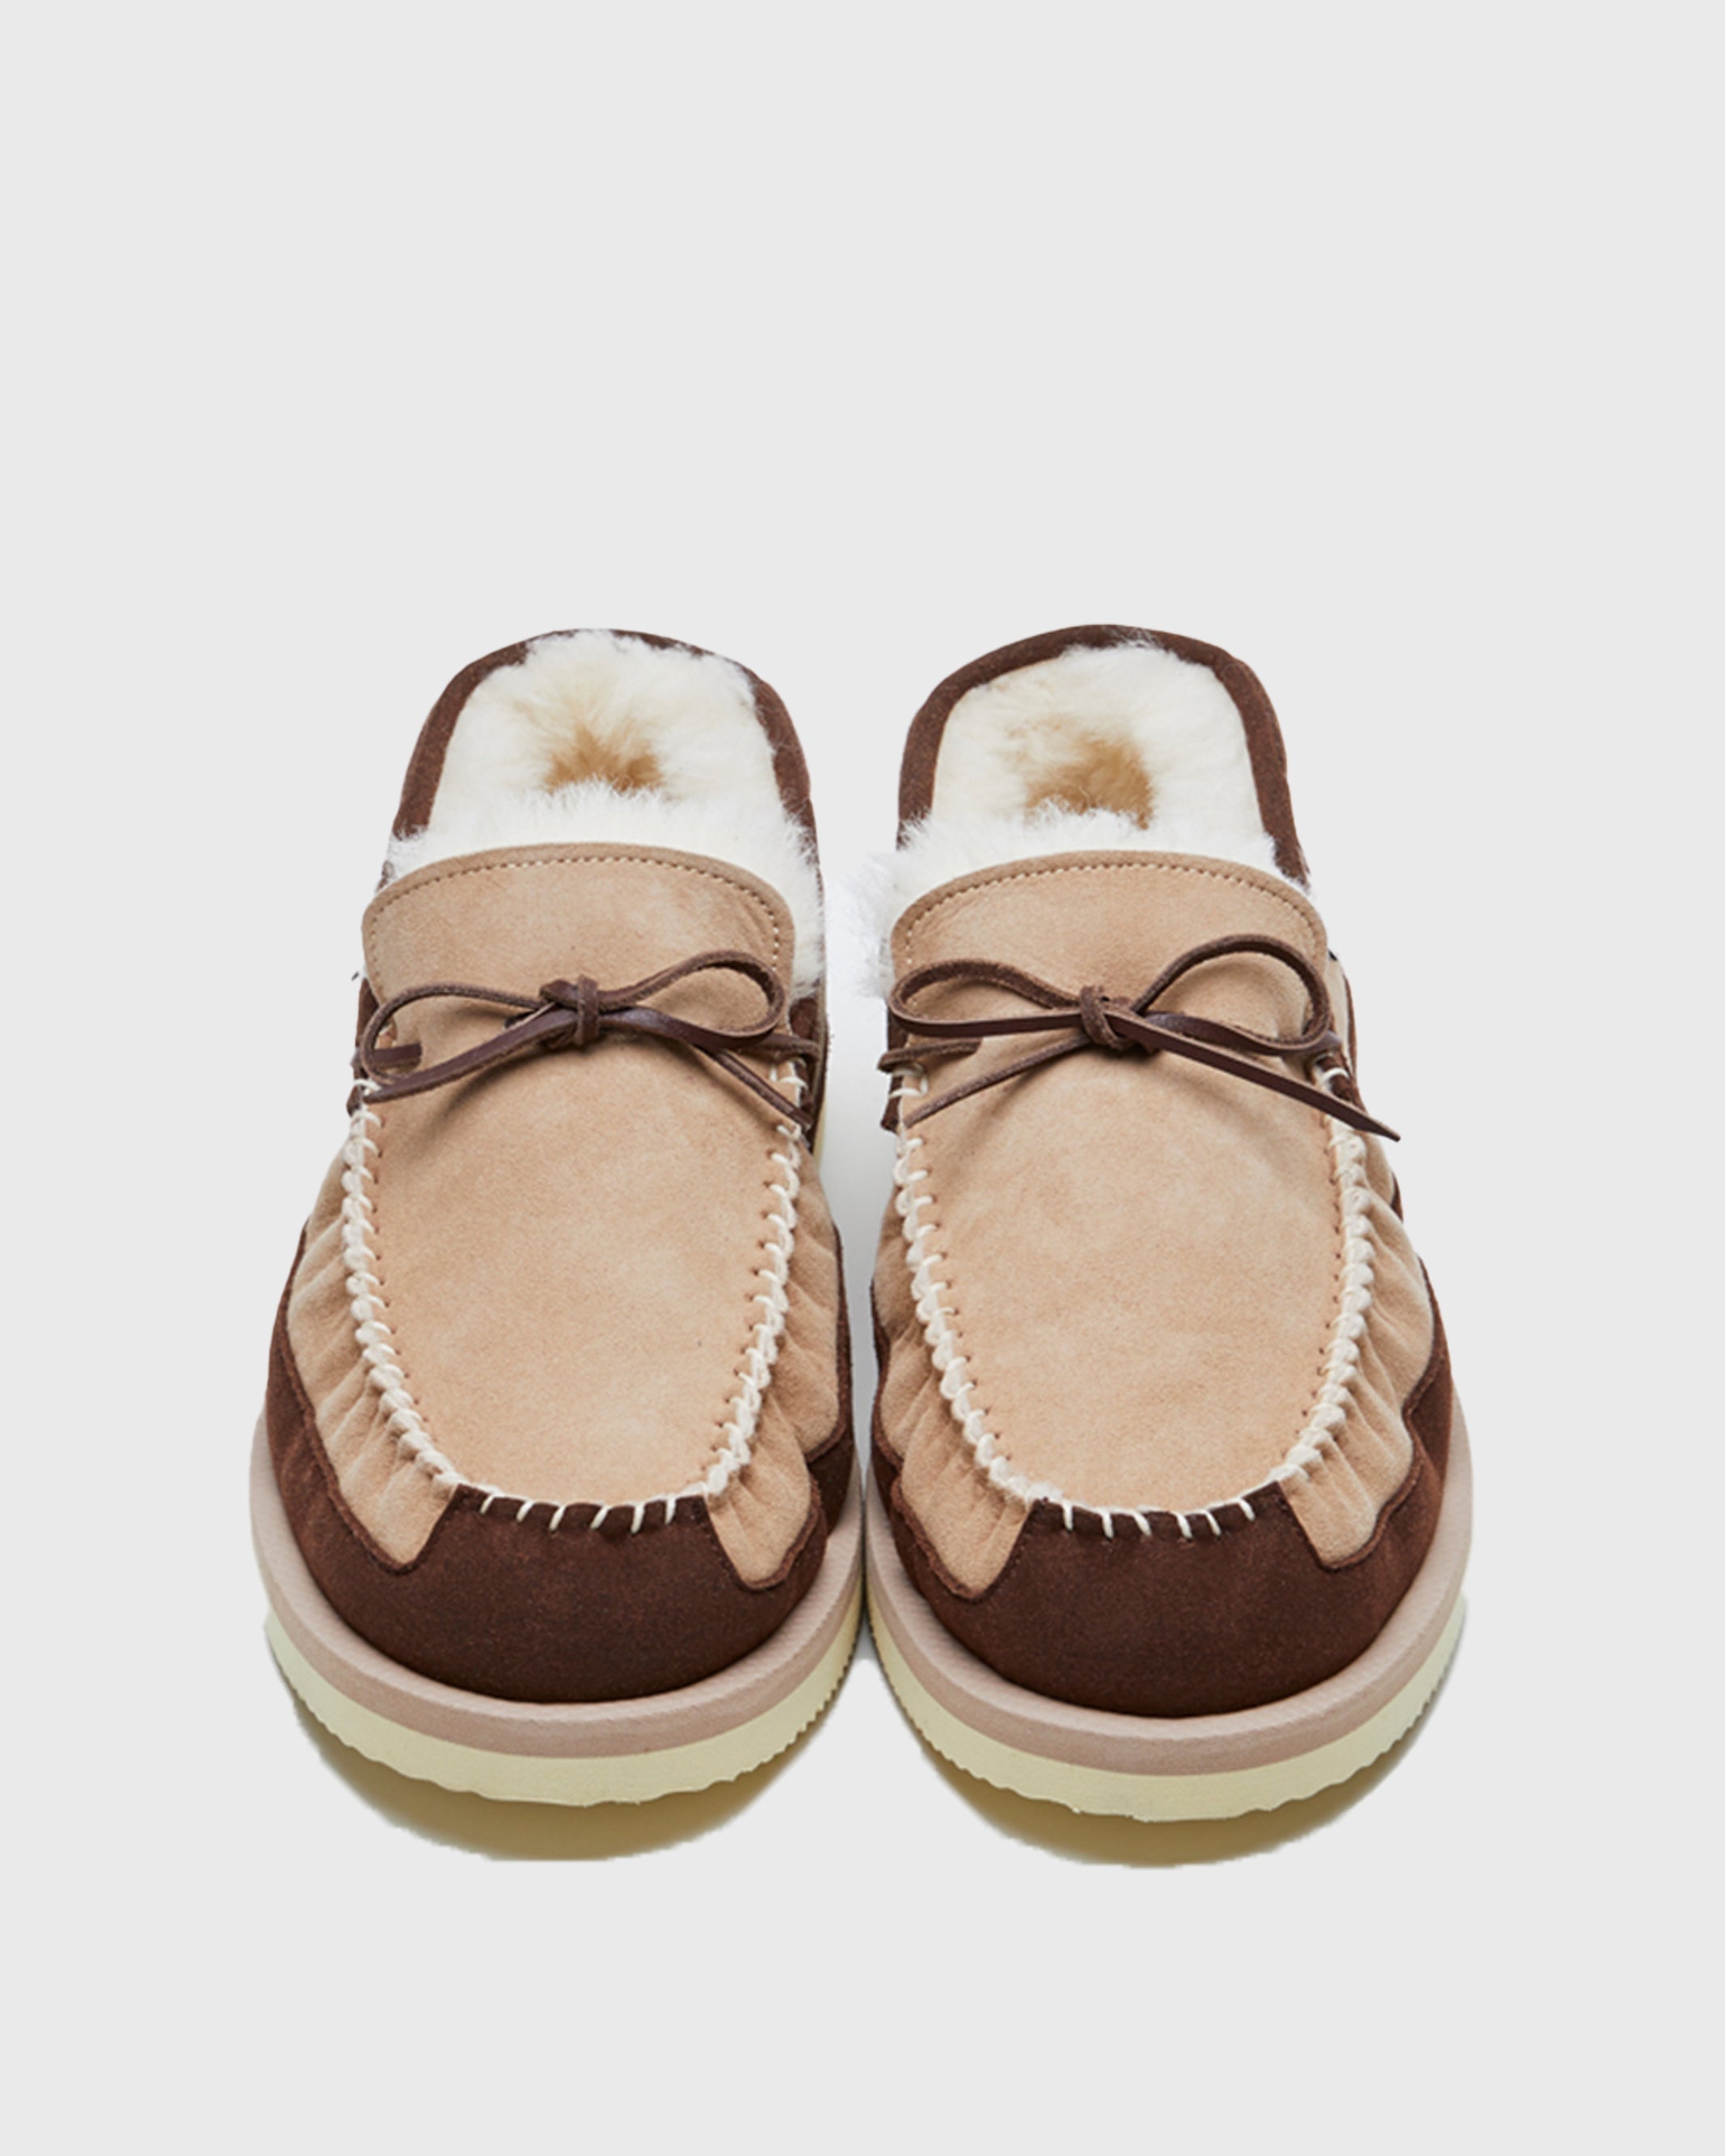 SUICOKE OWM-M2ab in Beige OG-199M2AB | Shop from eightywingold an official brand partner for SUICOKE Canada and US.